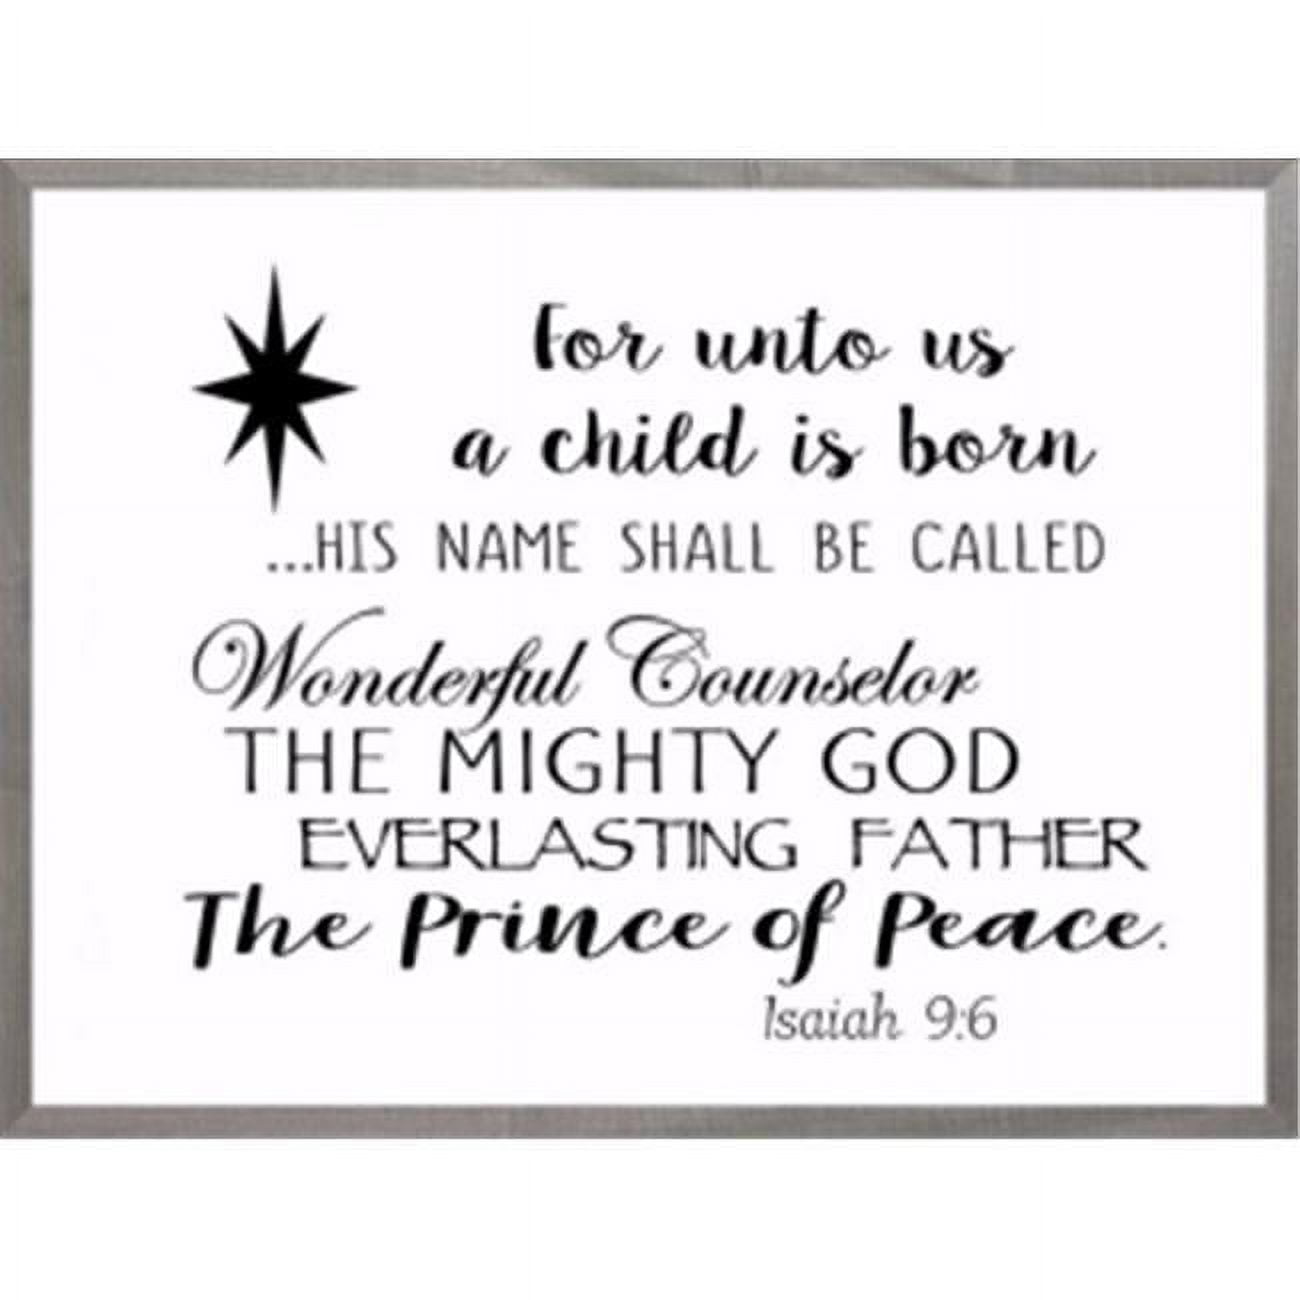 171857 8 X 10 In. Framed Art - Prince Of Peace